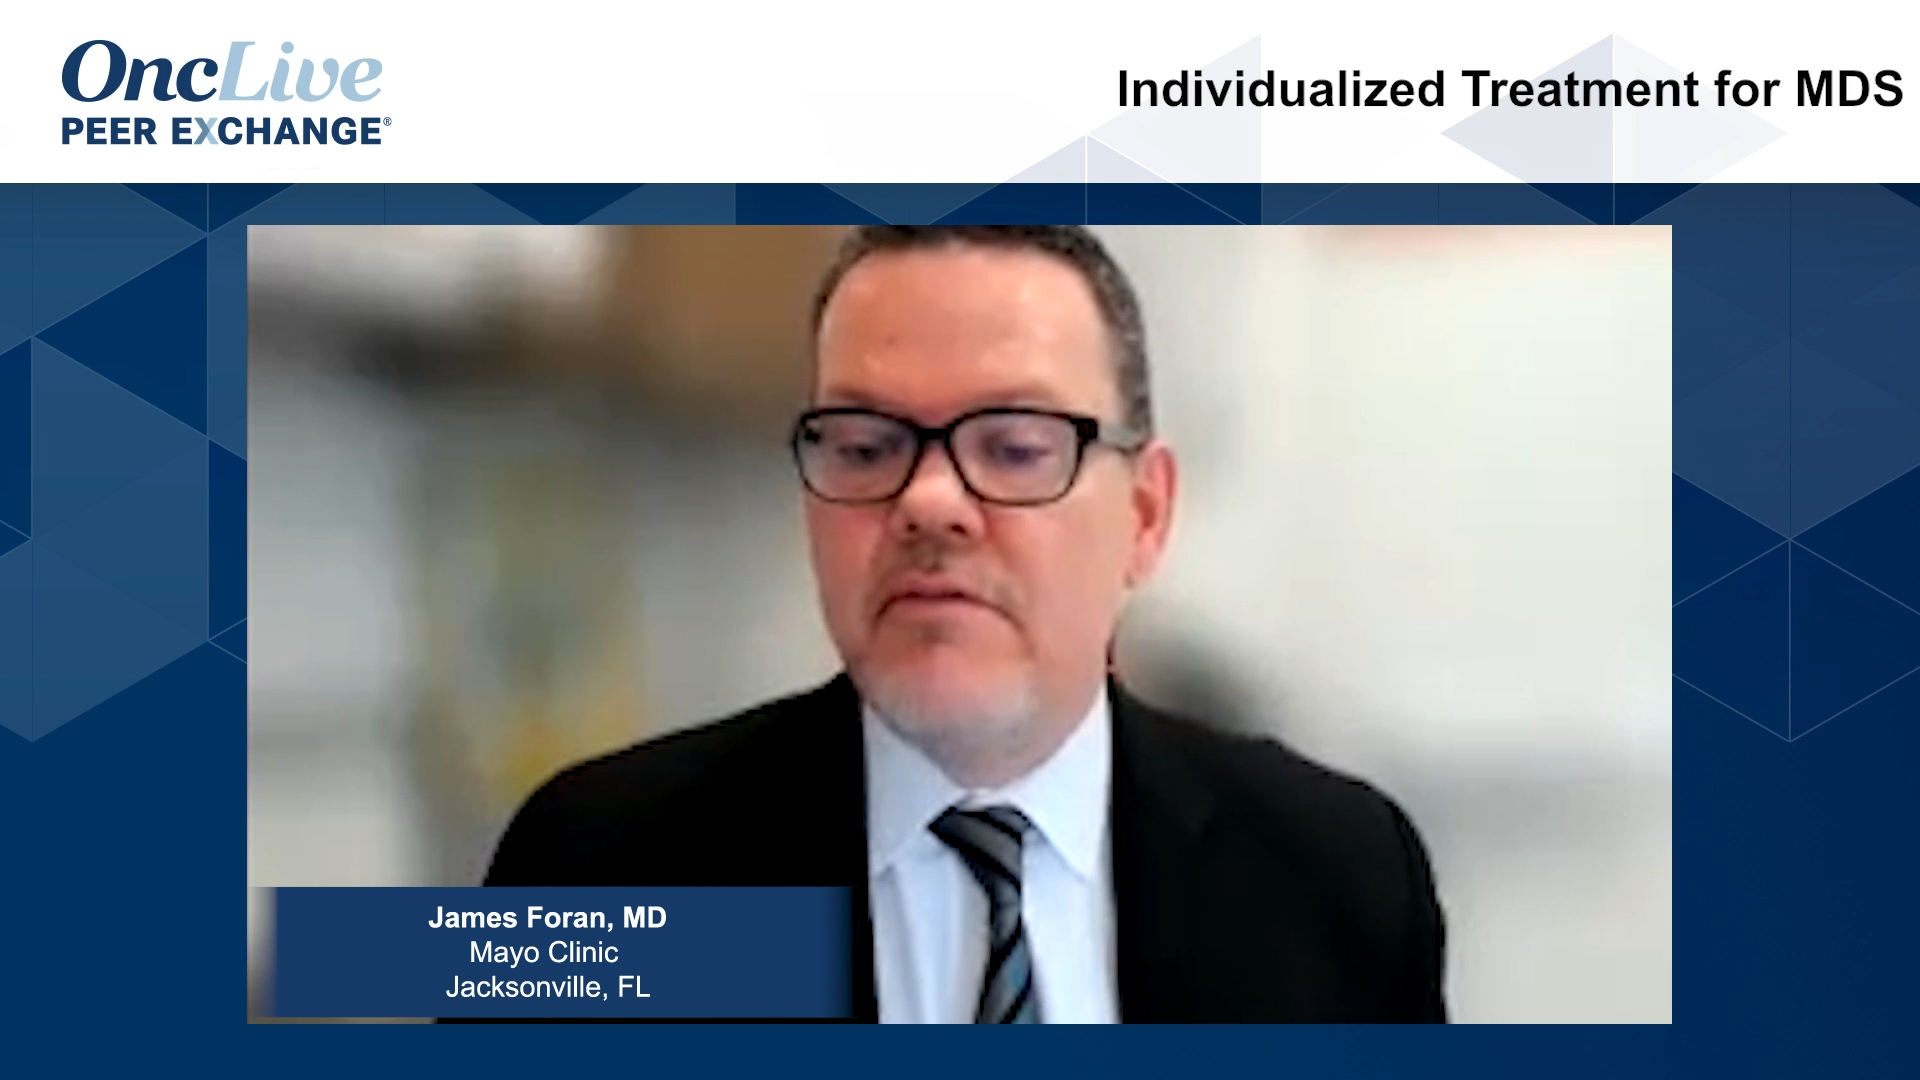 Individualized Treatment for MDS